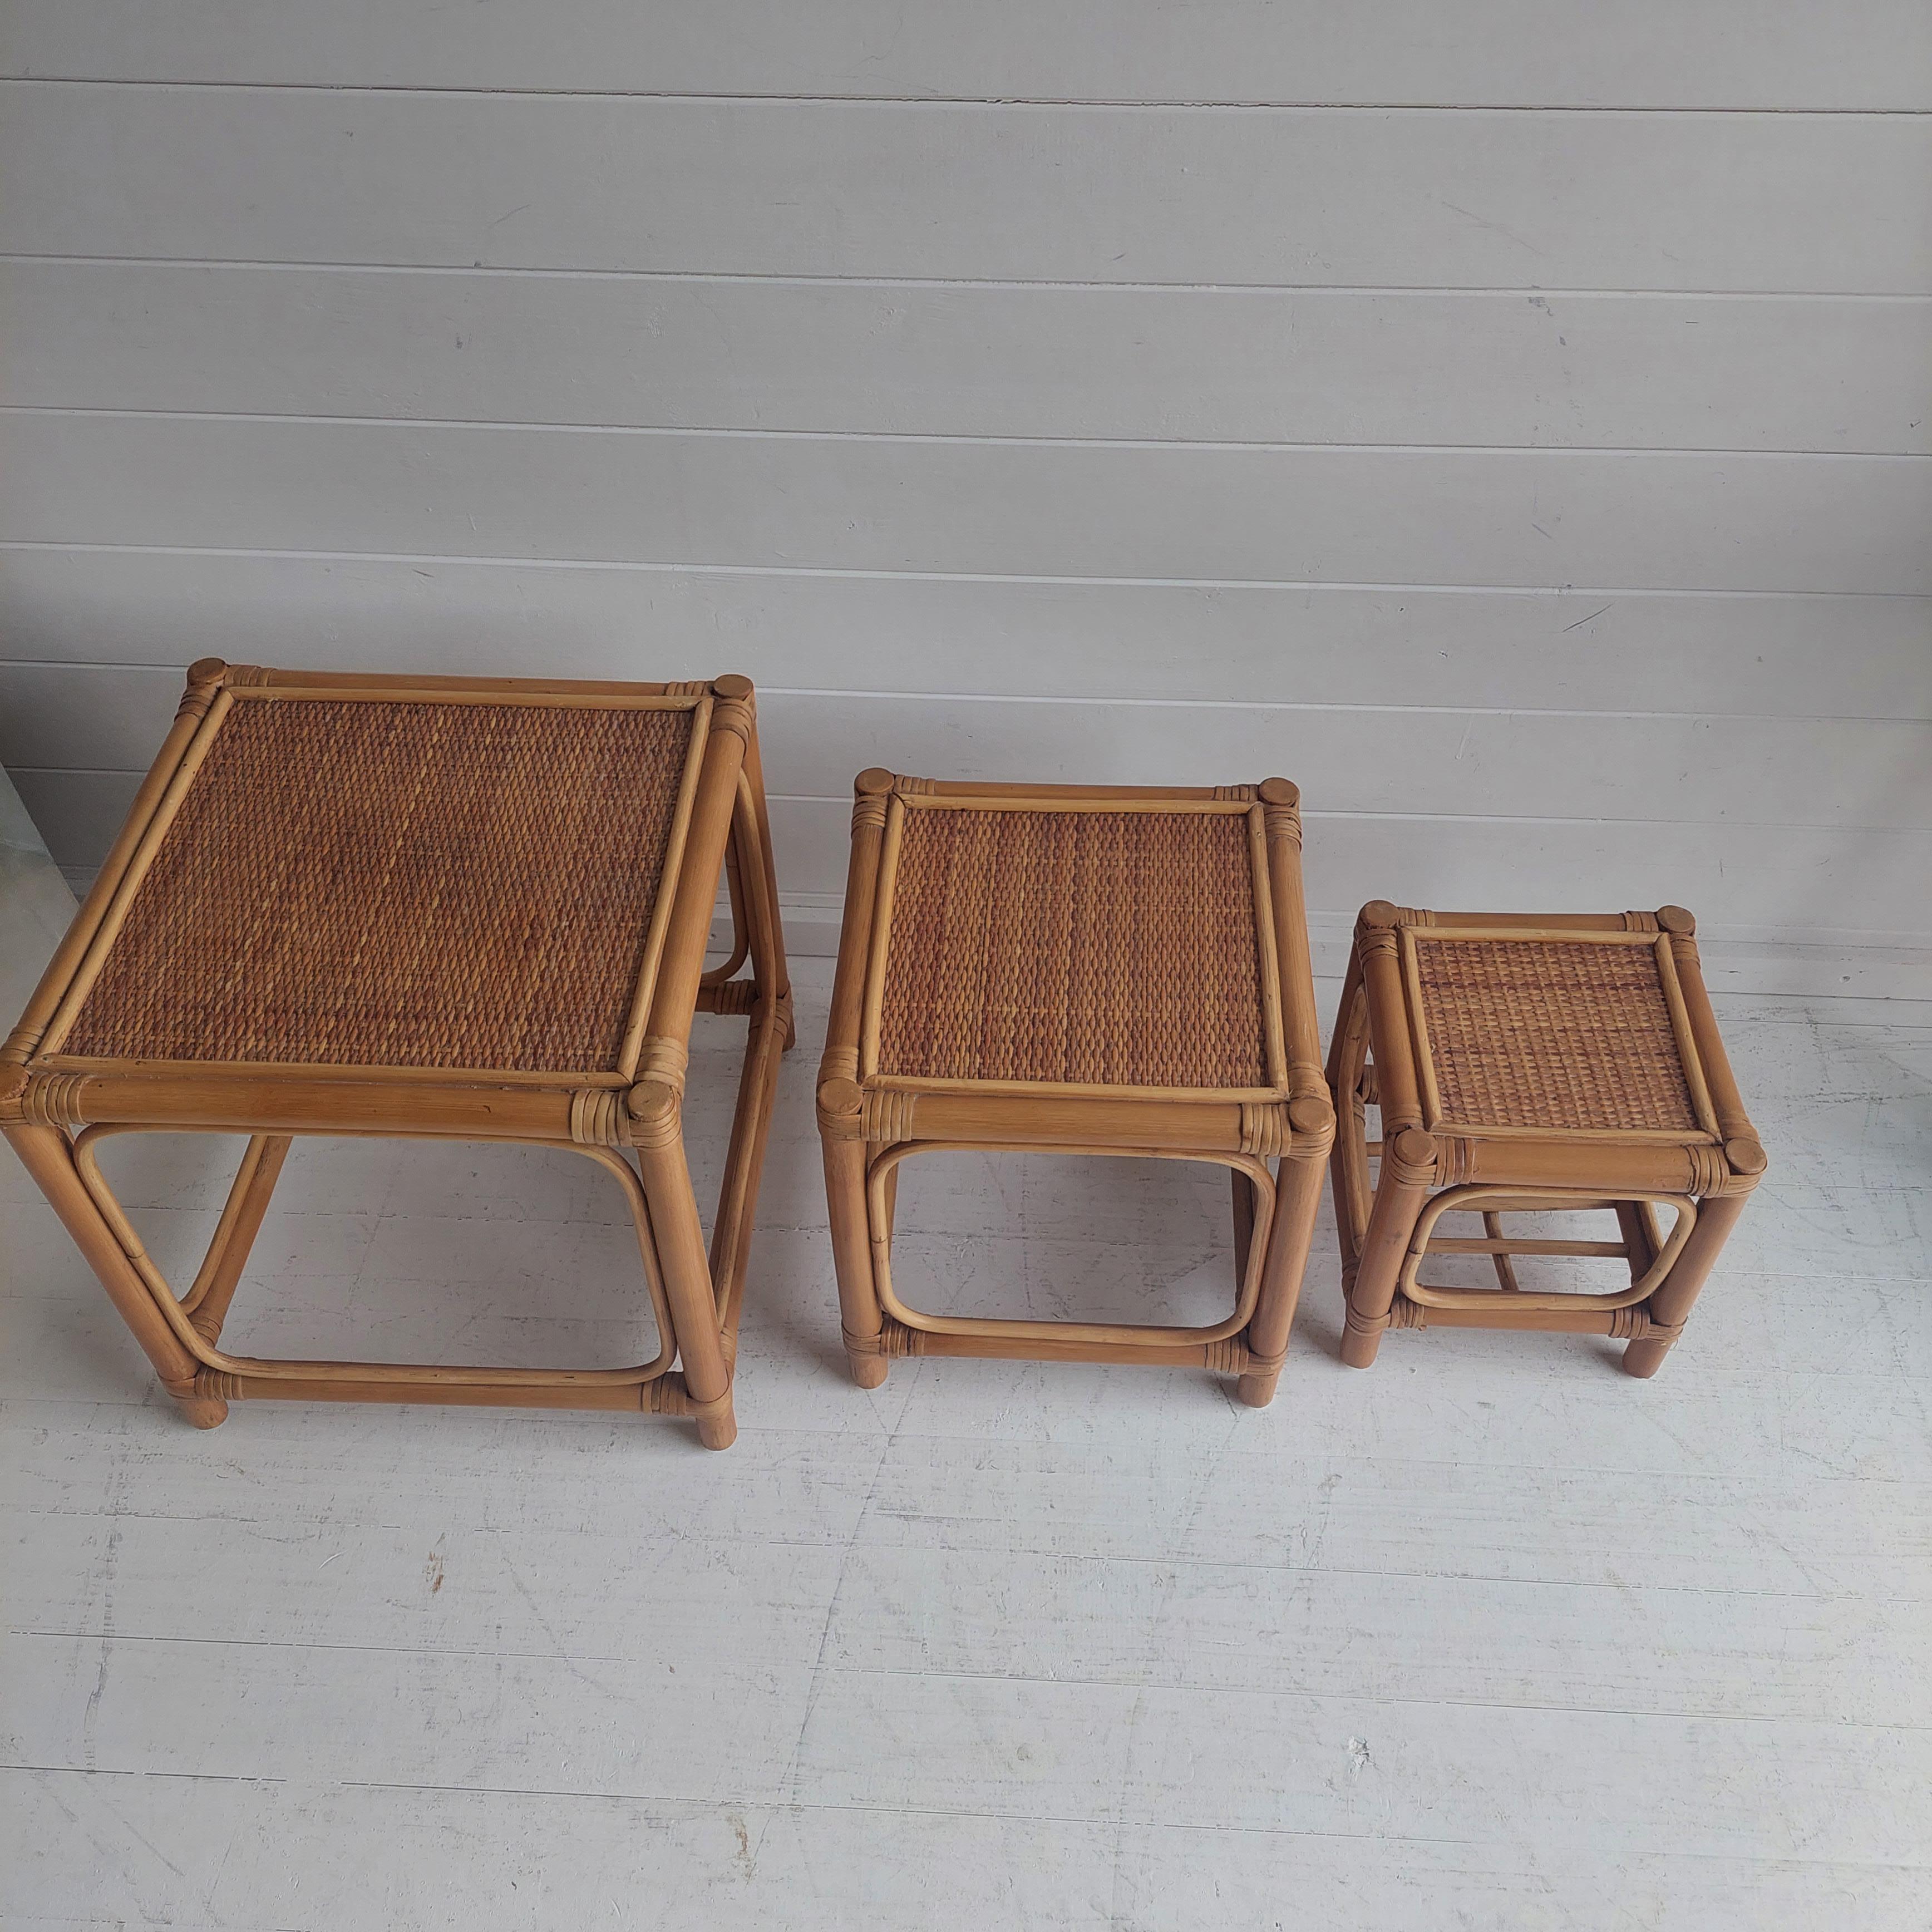 European Mid Century Bamboo Cube Nest of Tables Rattan Cane, 196-70s For Sale